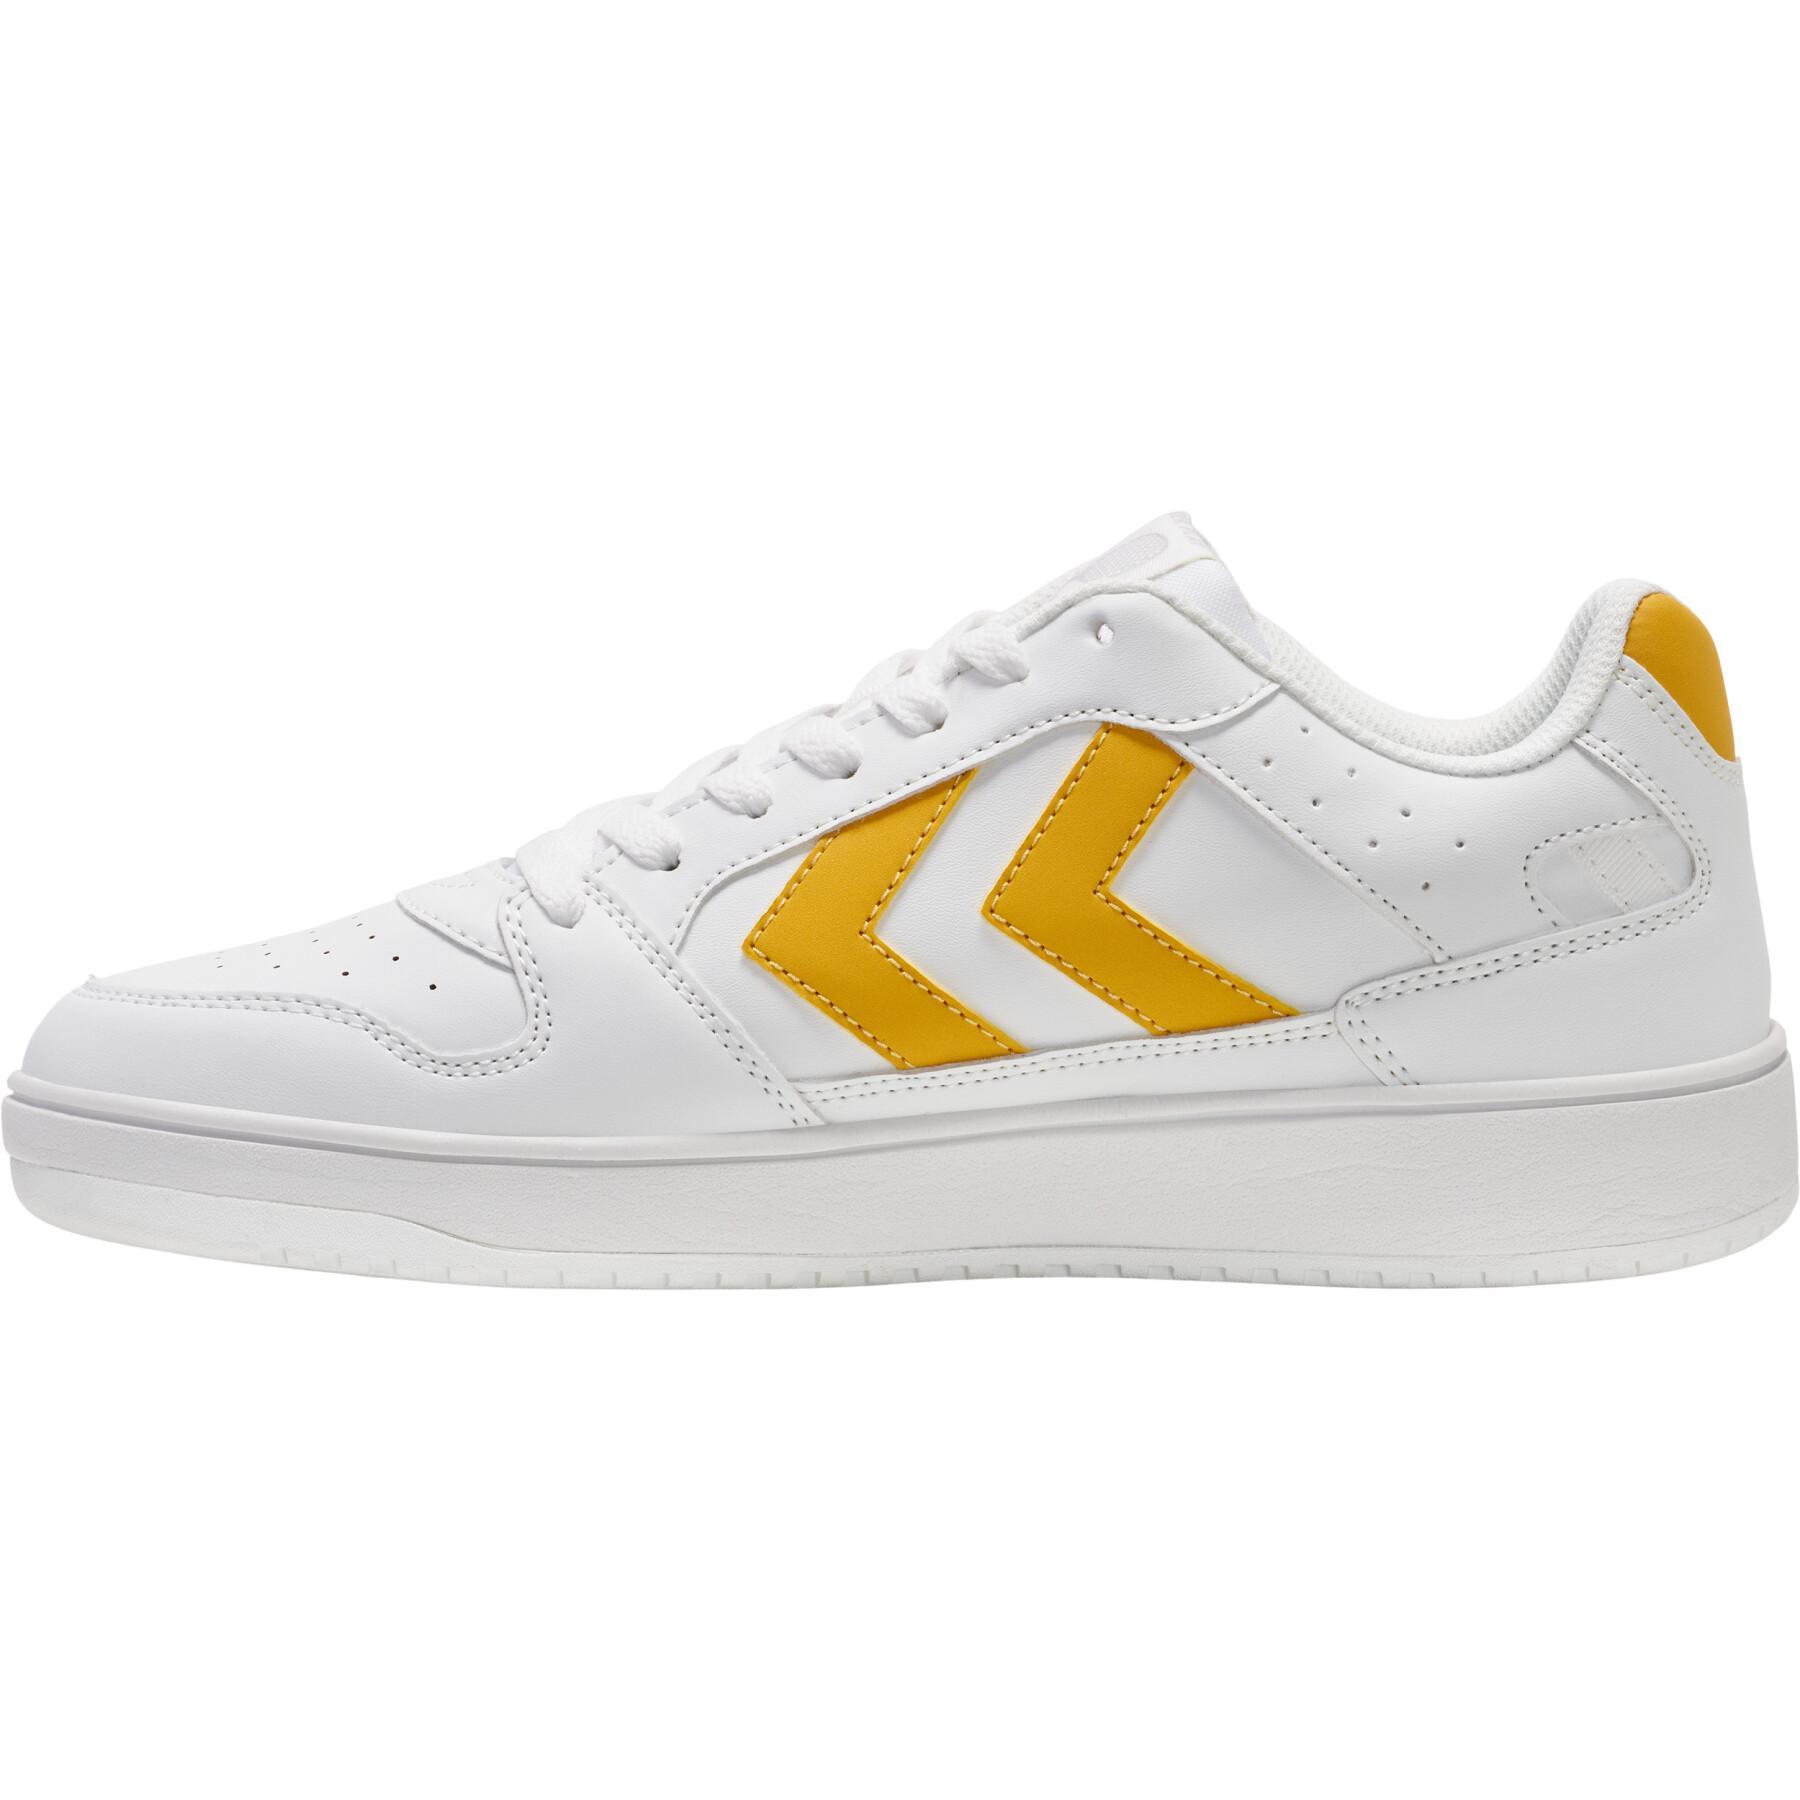 Sneakers Hummel St. Power Play Cl